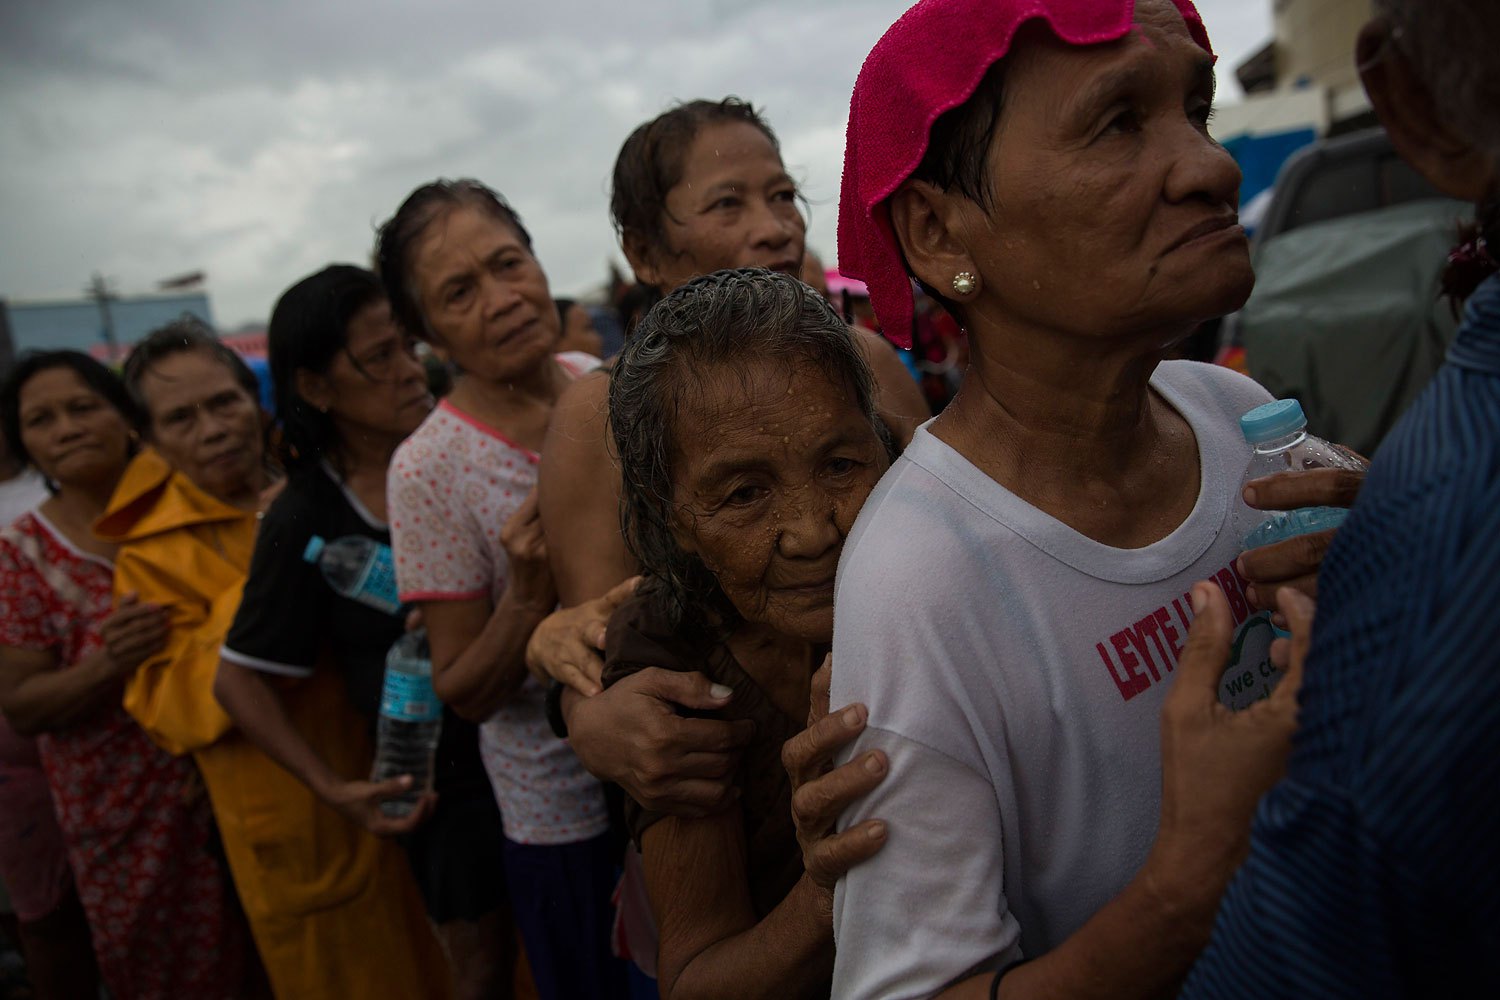 Displaced people effected by Haiyan Typhoon queue in the rain for the first aid delivery at a displacement camp in Tacloban, Philippines on November 14, 2013.